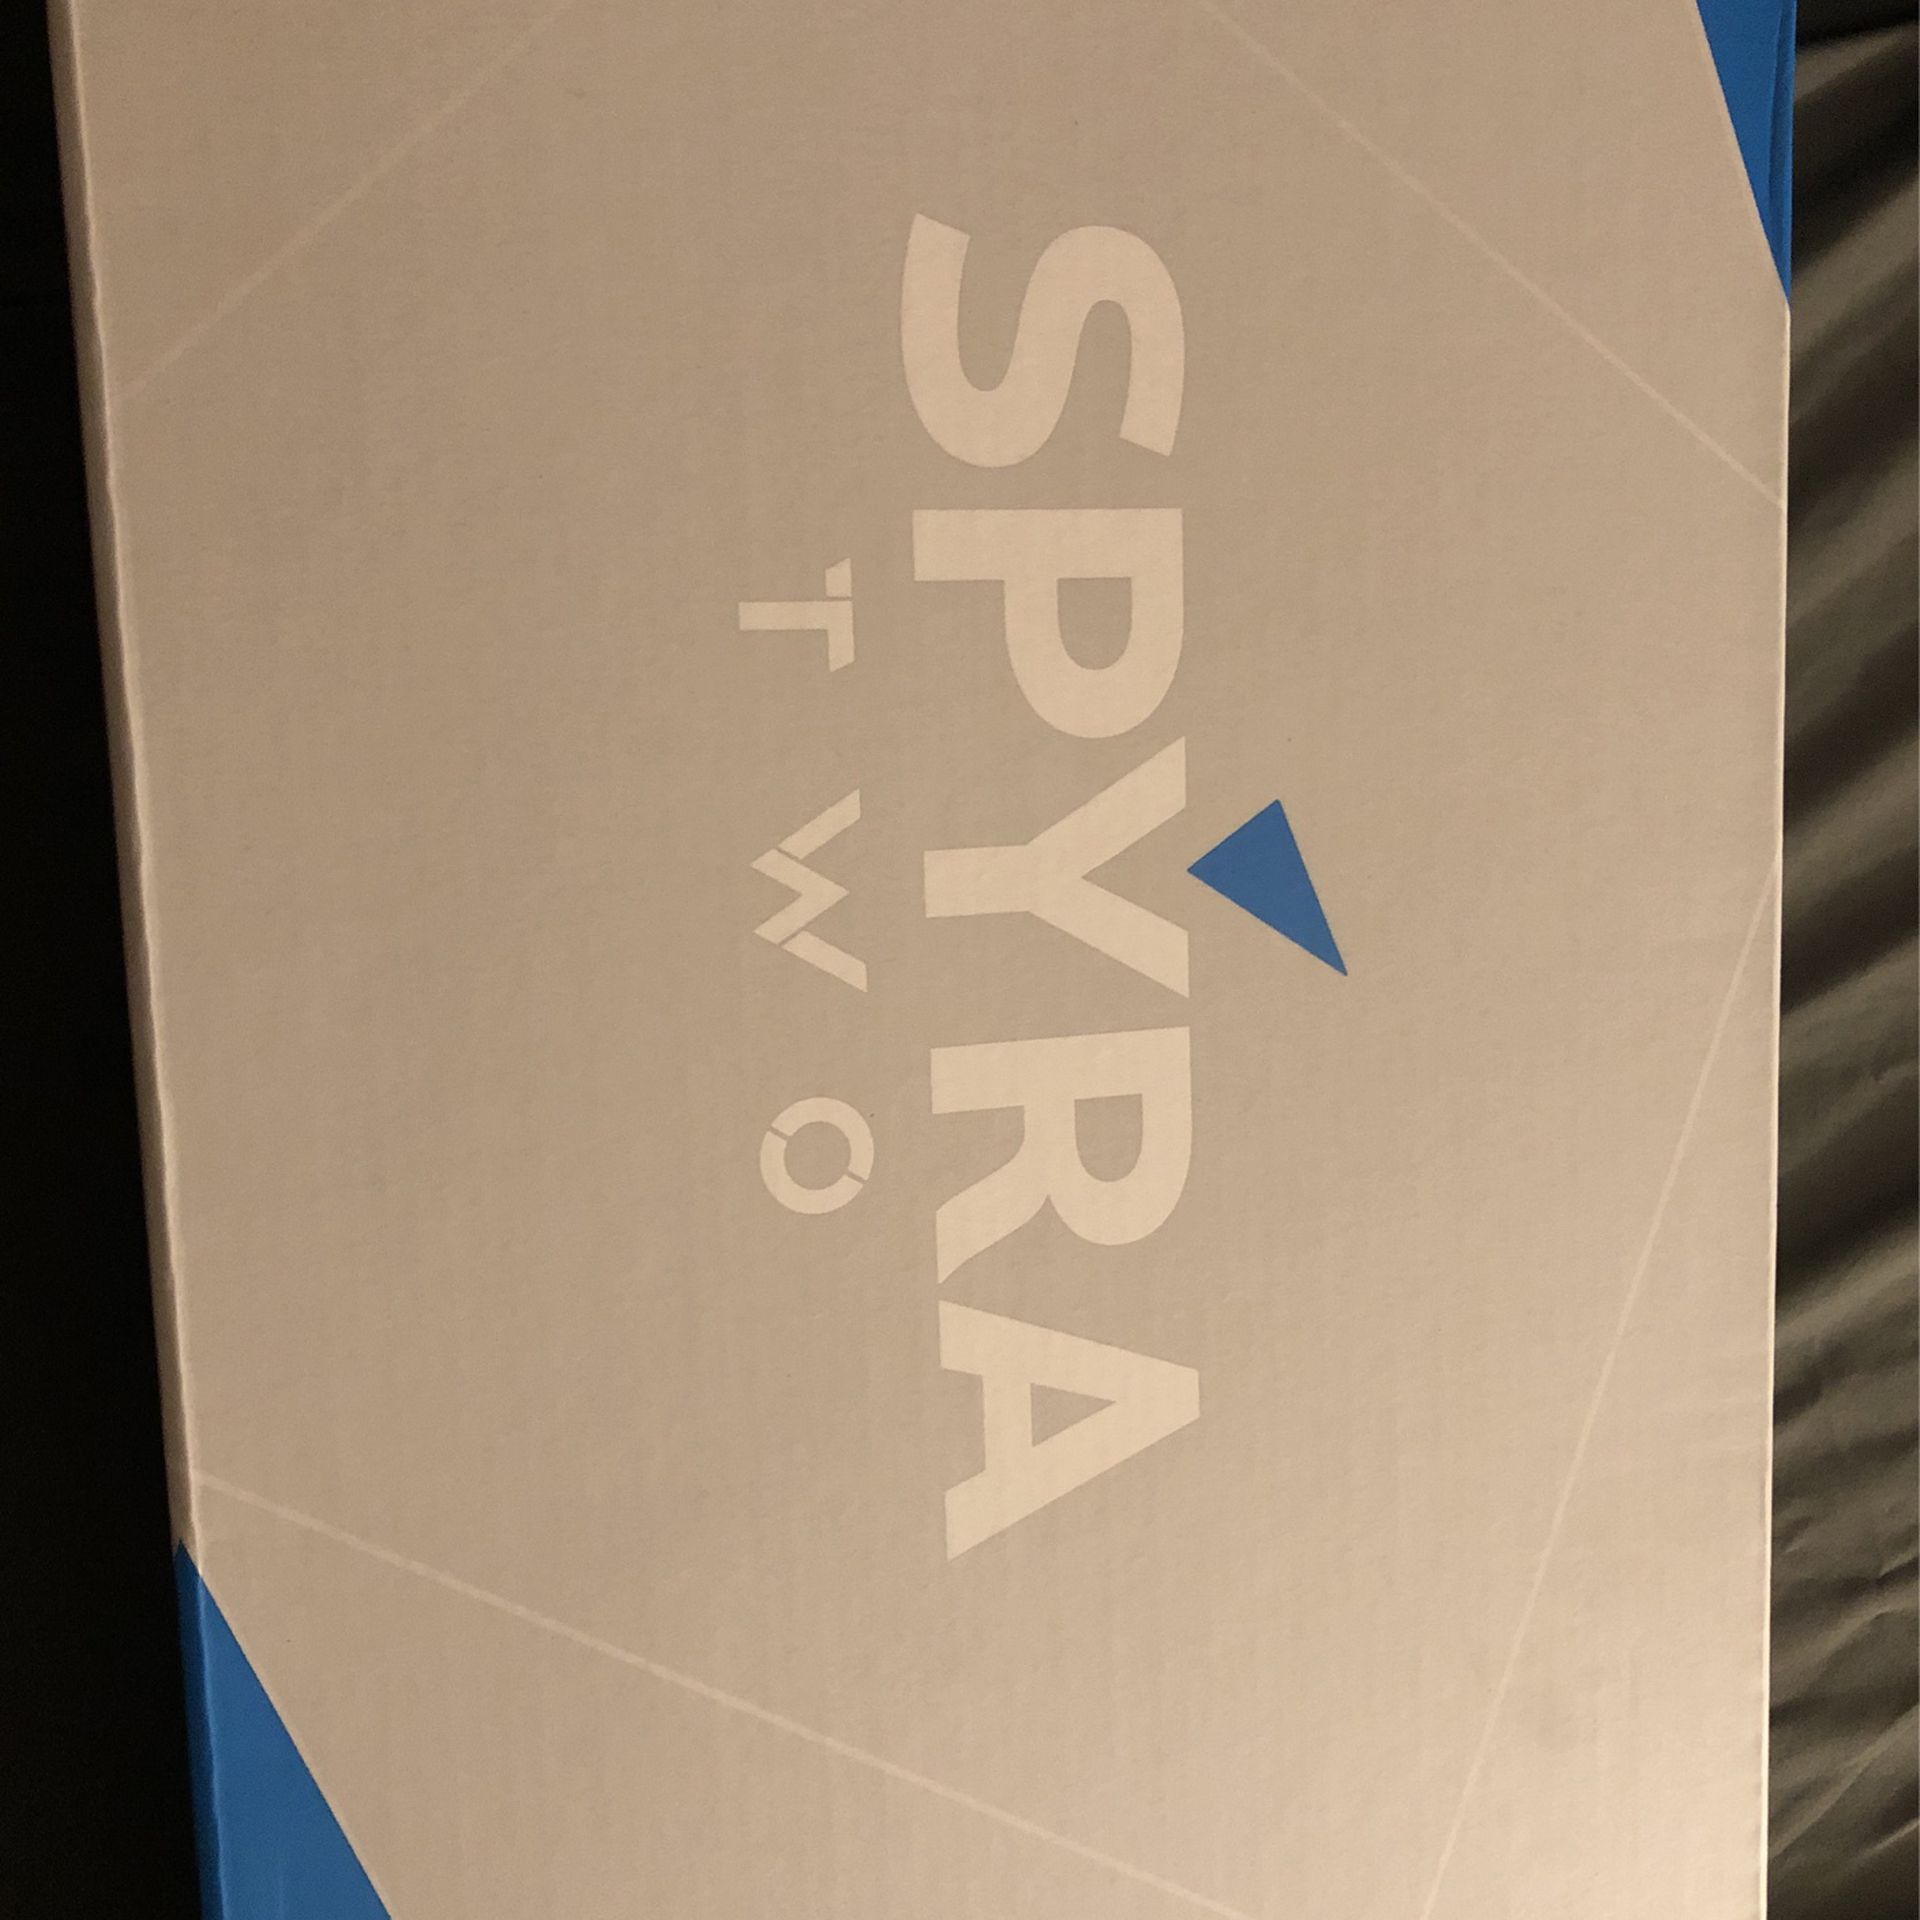 Spyra Water Blaster 2 for Sale in Irving, TX - OfferUp